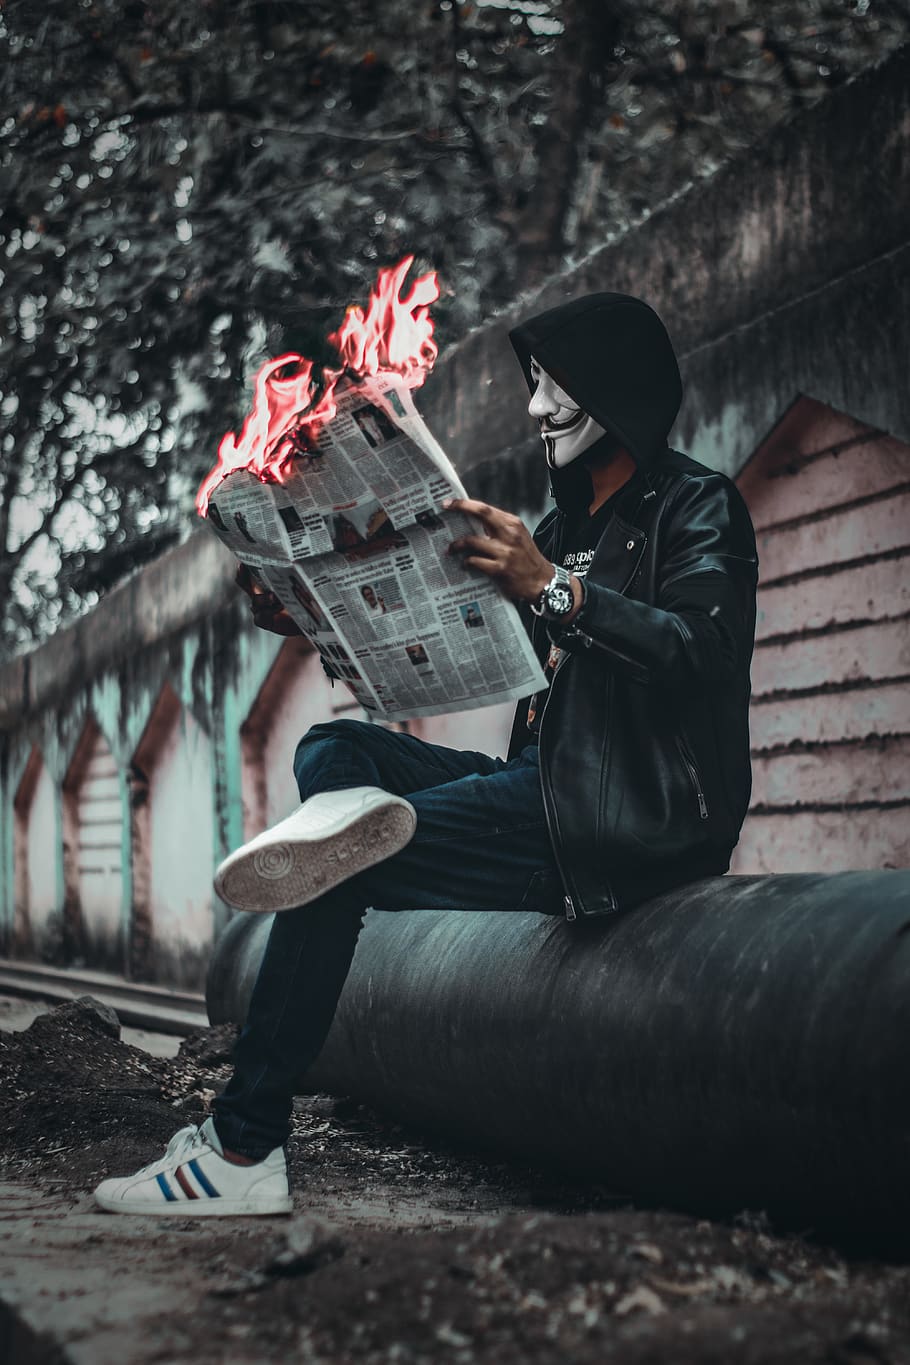 HD wallpaper: Man Wearing Mask Sitting Down and Holding Newspaper With Fire  | Wallpaper Flare